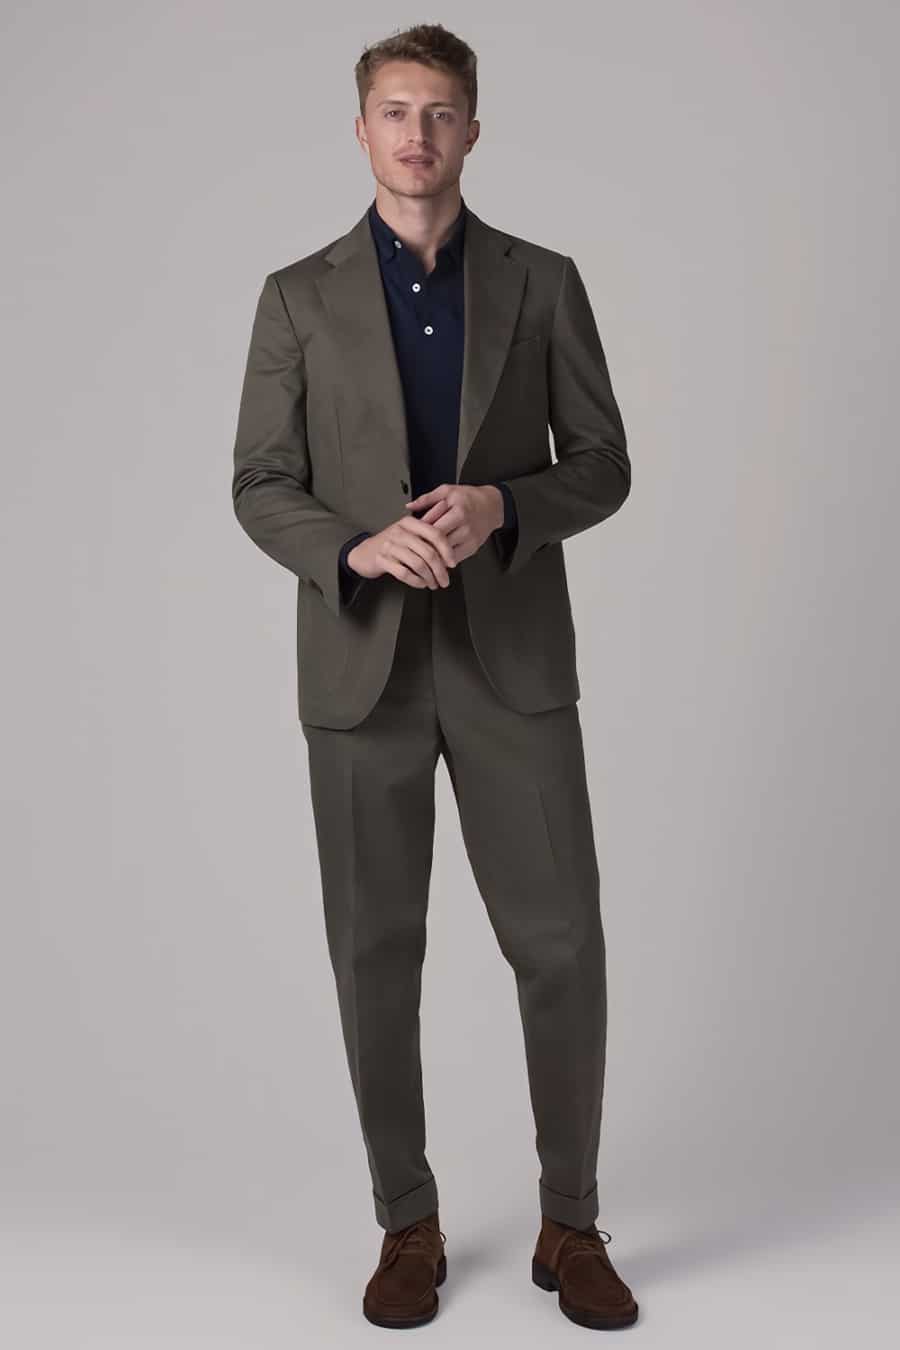 Men's olive green cotton suit, navy polo shirt and brown suede chukka boots outfit